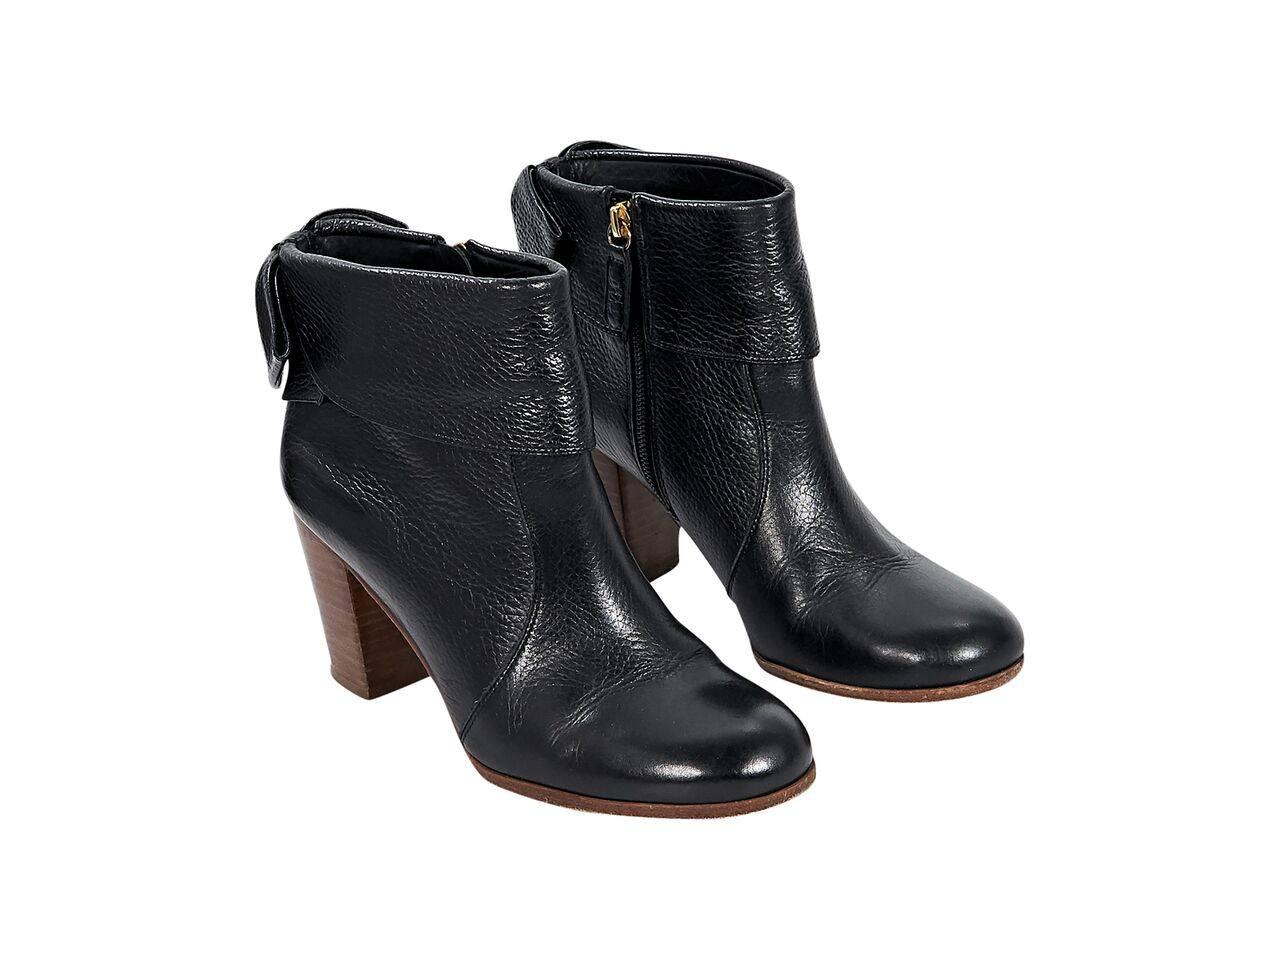 Product details:  Black pebbled leather ankle boots by Kate Spade New York.  Bows accent back of shaft.  Round toe.  Chunky stacked heel.  Inner zip closure.  
Condition: Pre-owned. Very good.
Est. Retail $ 448.00